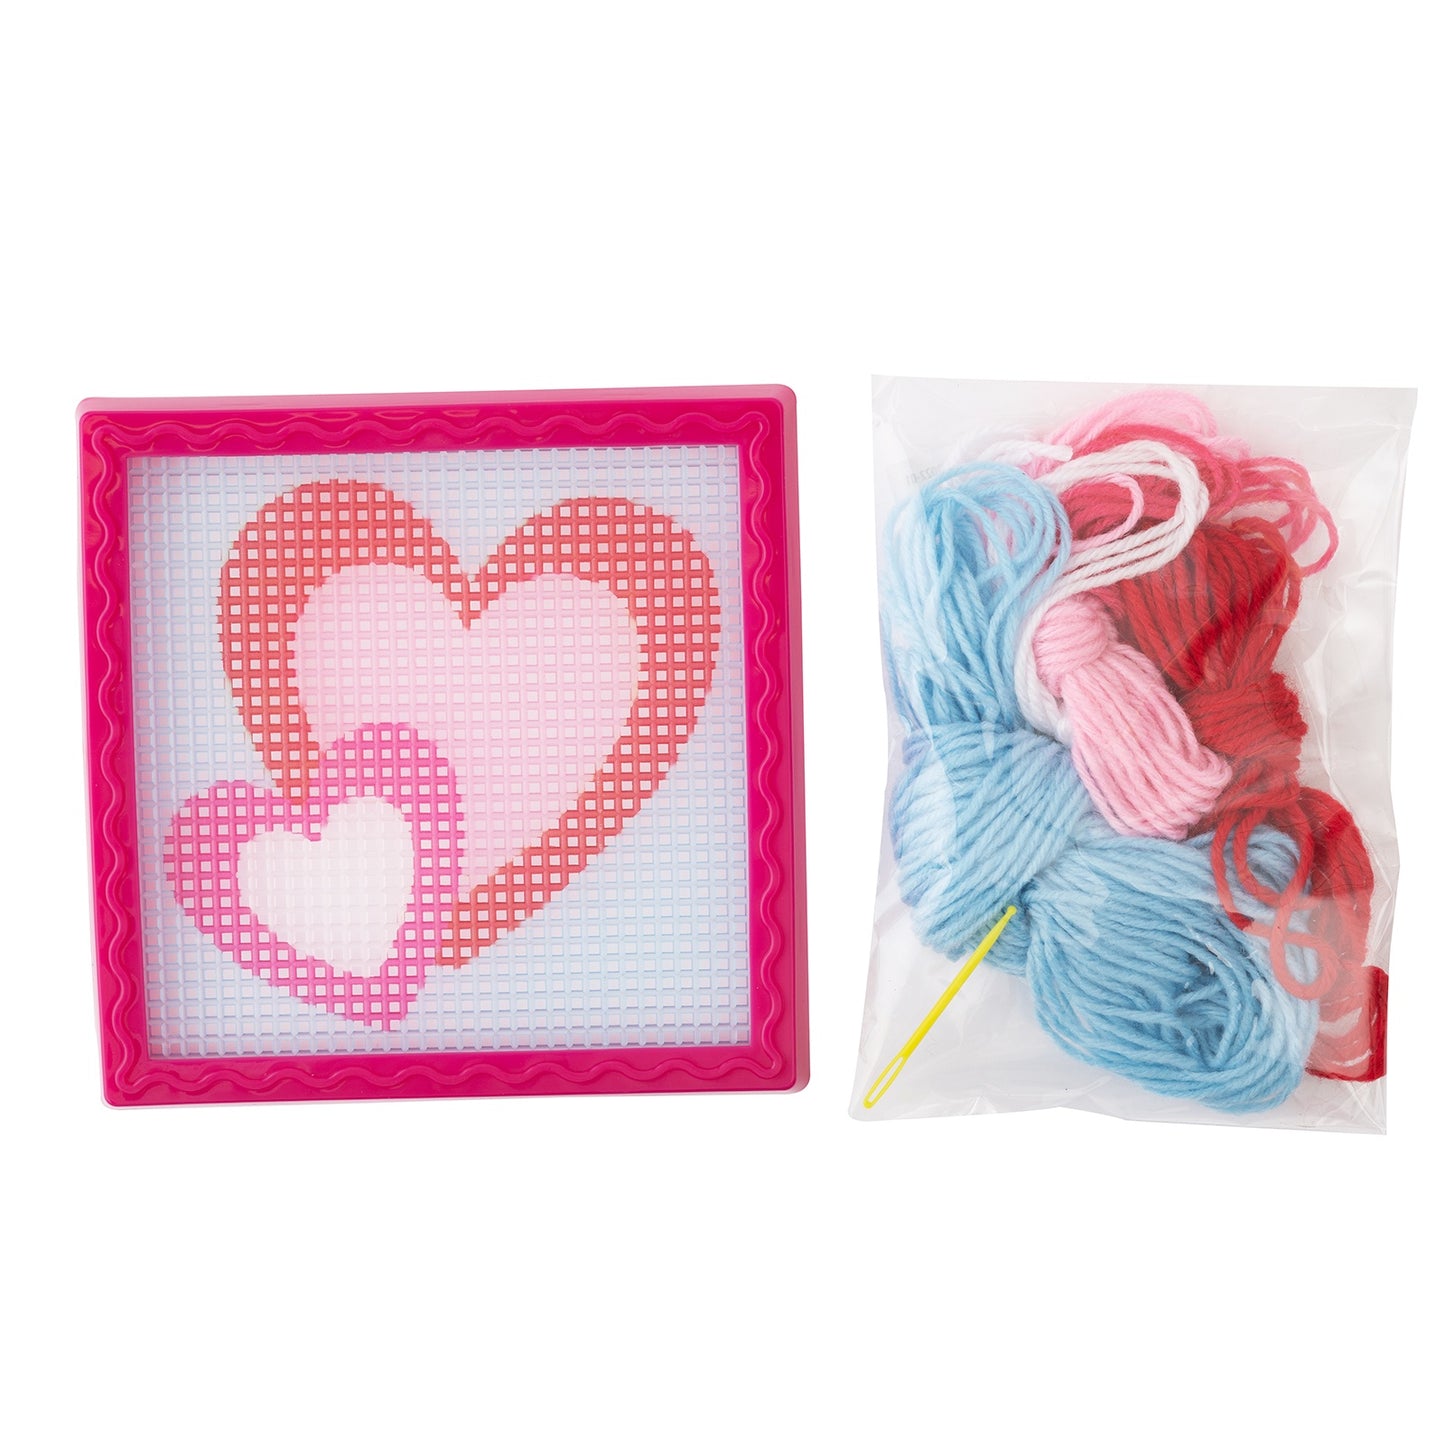 Colorbok Cupid Club Needlepoint Kit-Layered Heart